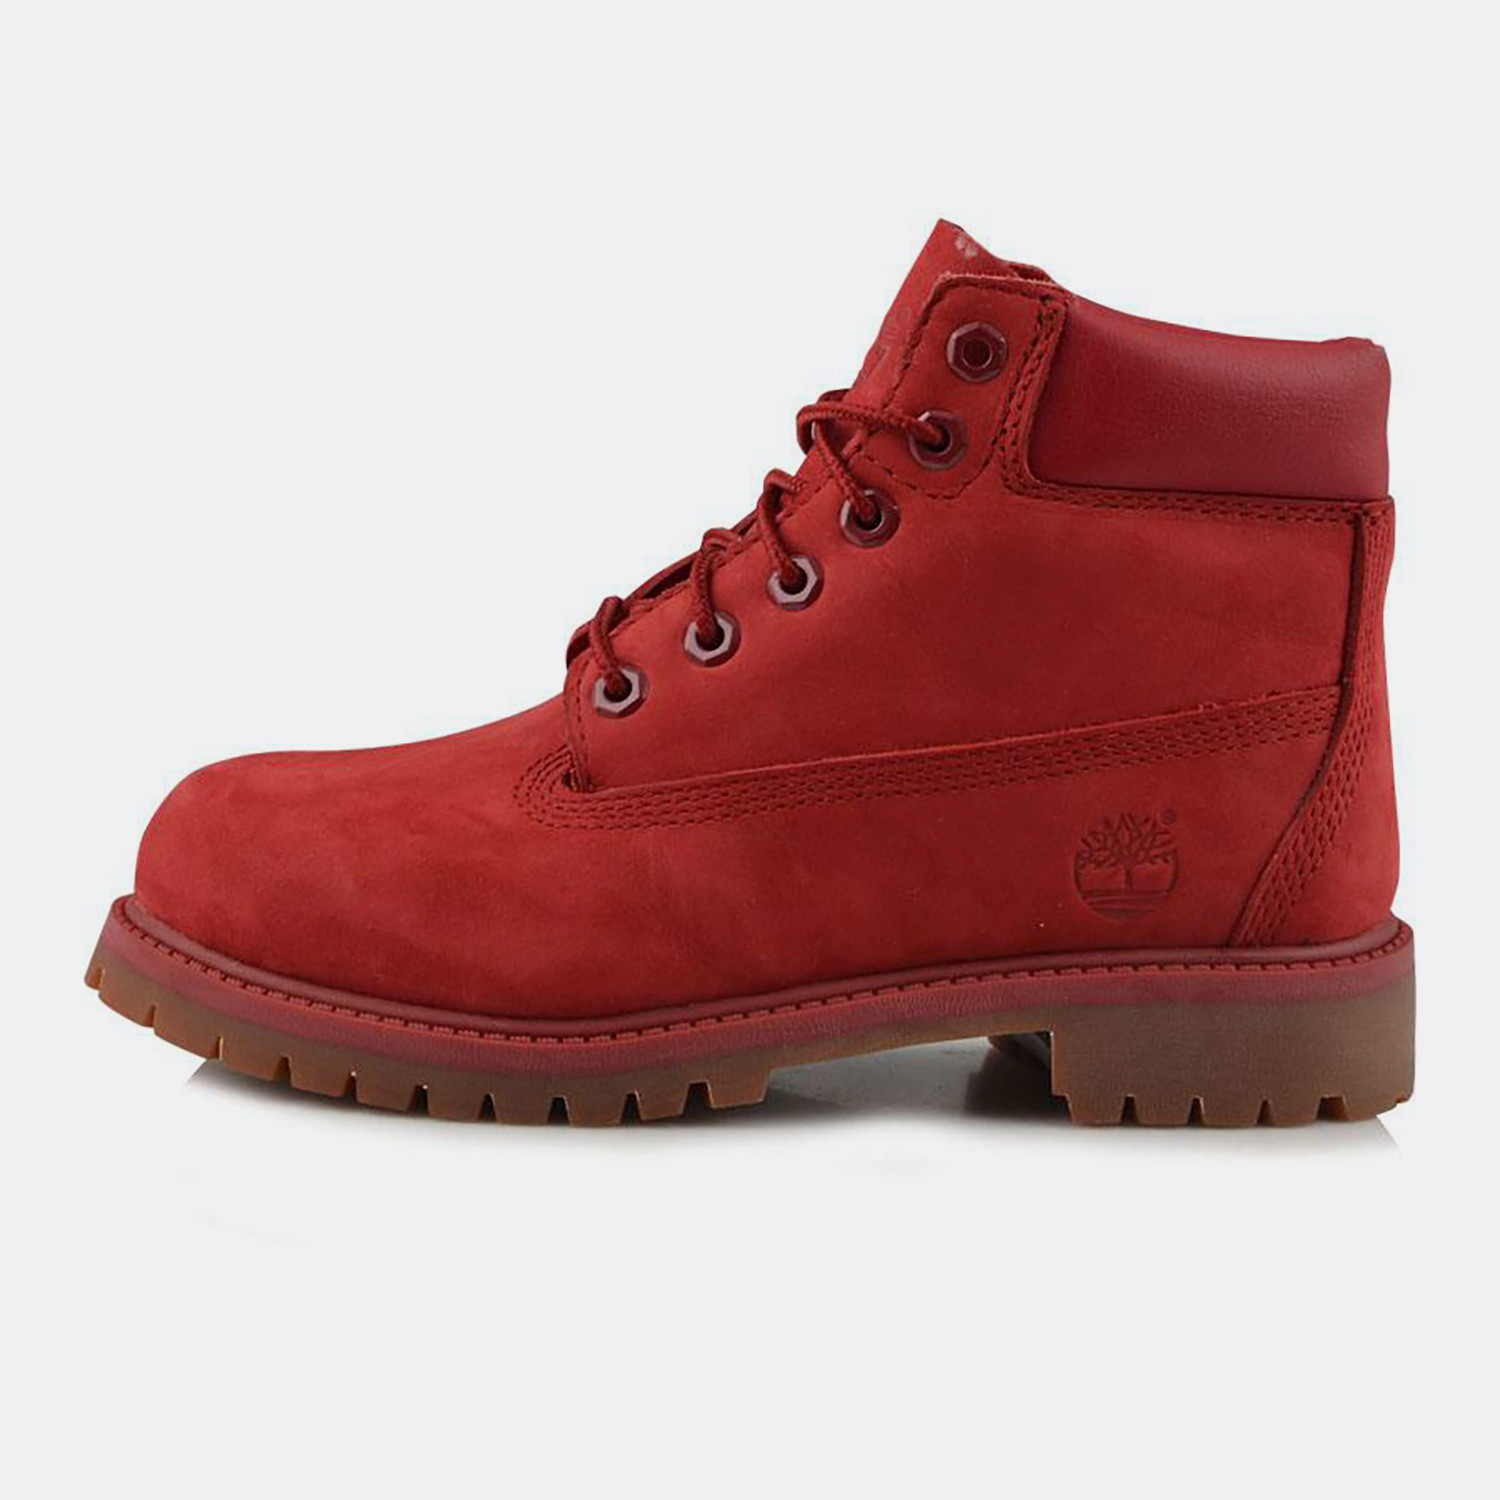 Timberland 6 In Premium Wp Boot Red (1080031571_1634)